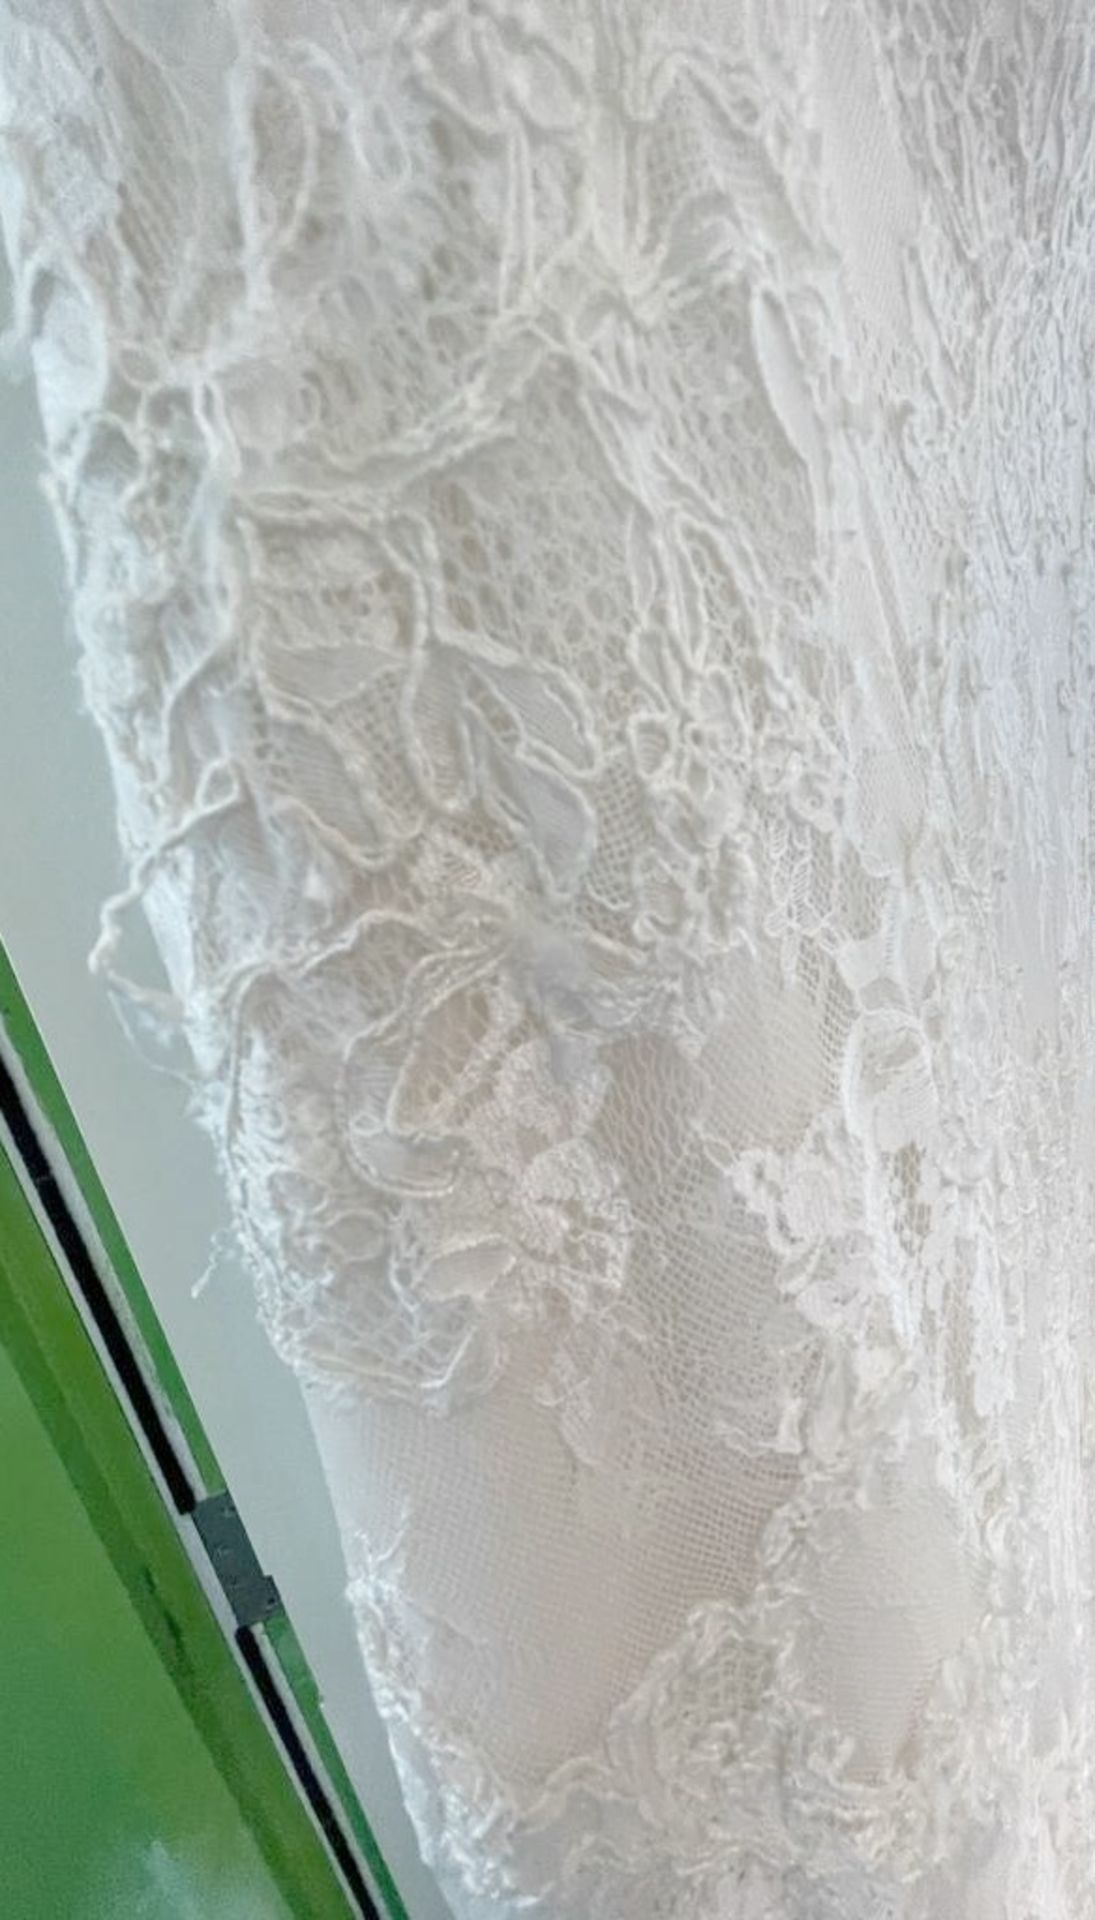 1 x LUSAN MANDONGUS 'Tabia' Fishtail Designer Wedding Dress Bridal Gown, With Chantilly Lace - Image 3 of 15